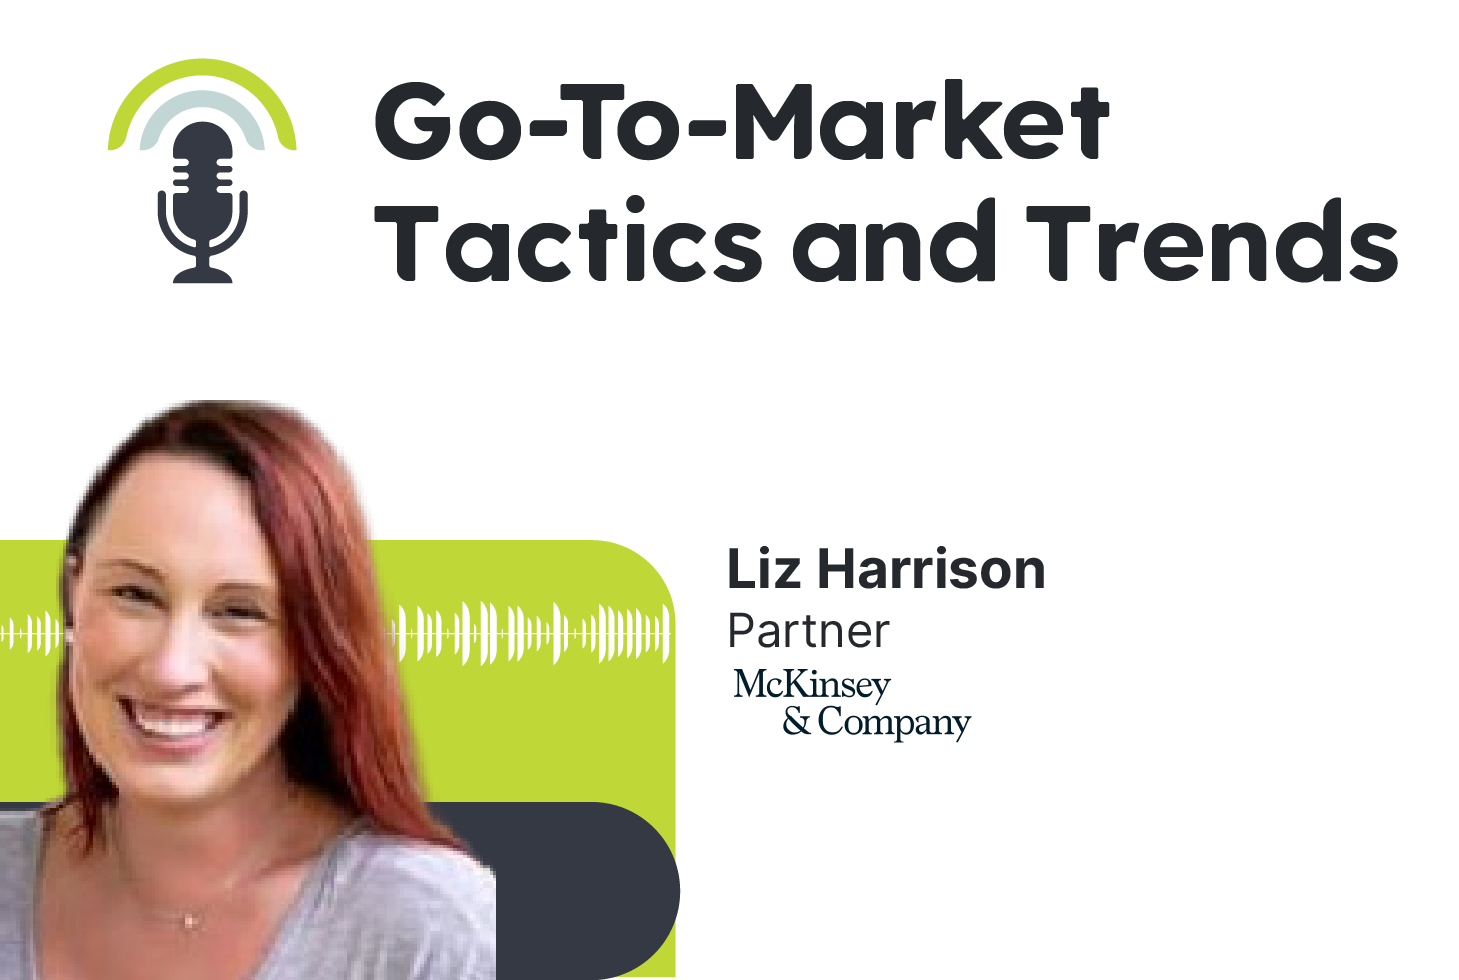 Key Go-To-Market Tactics and Trends Happening Now